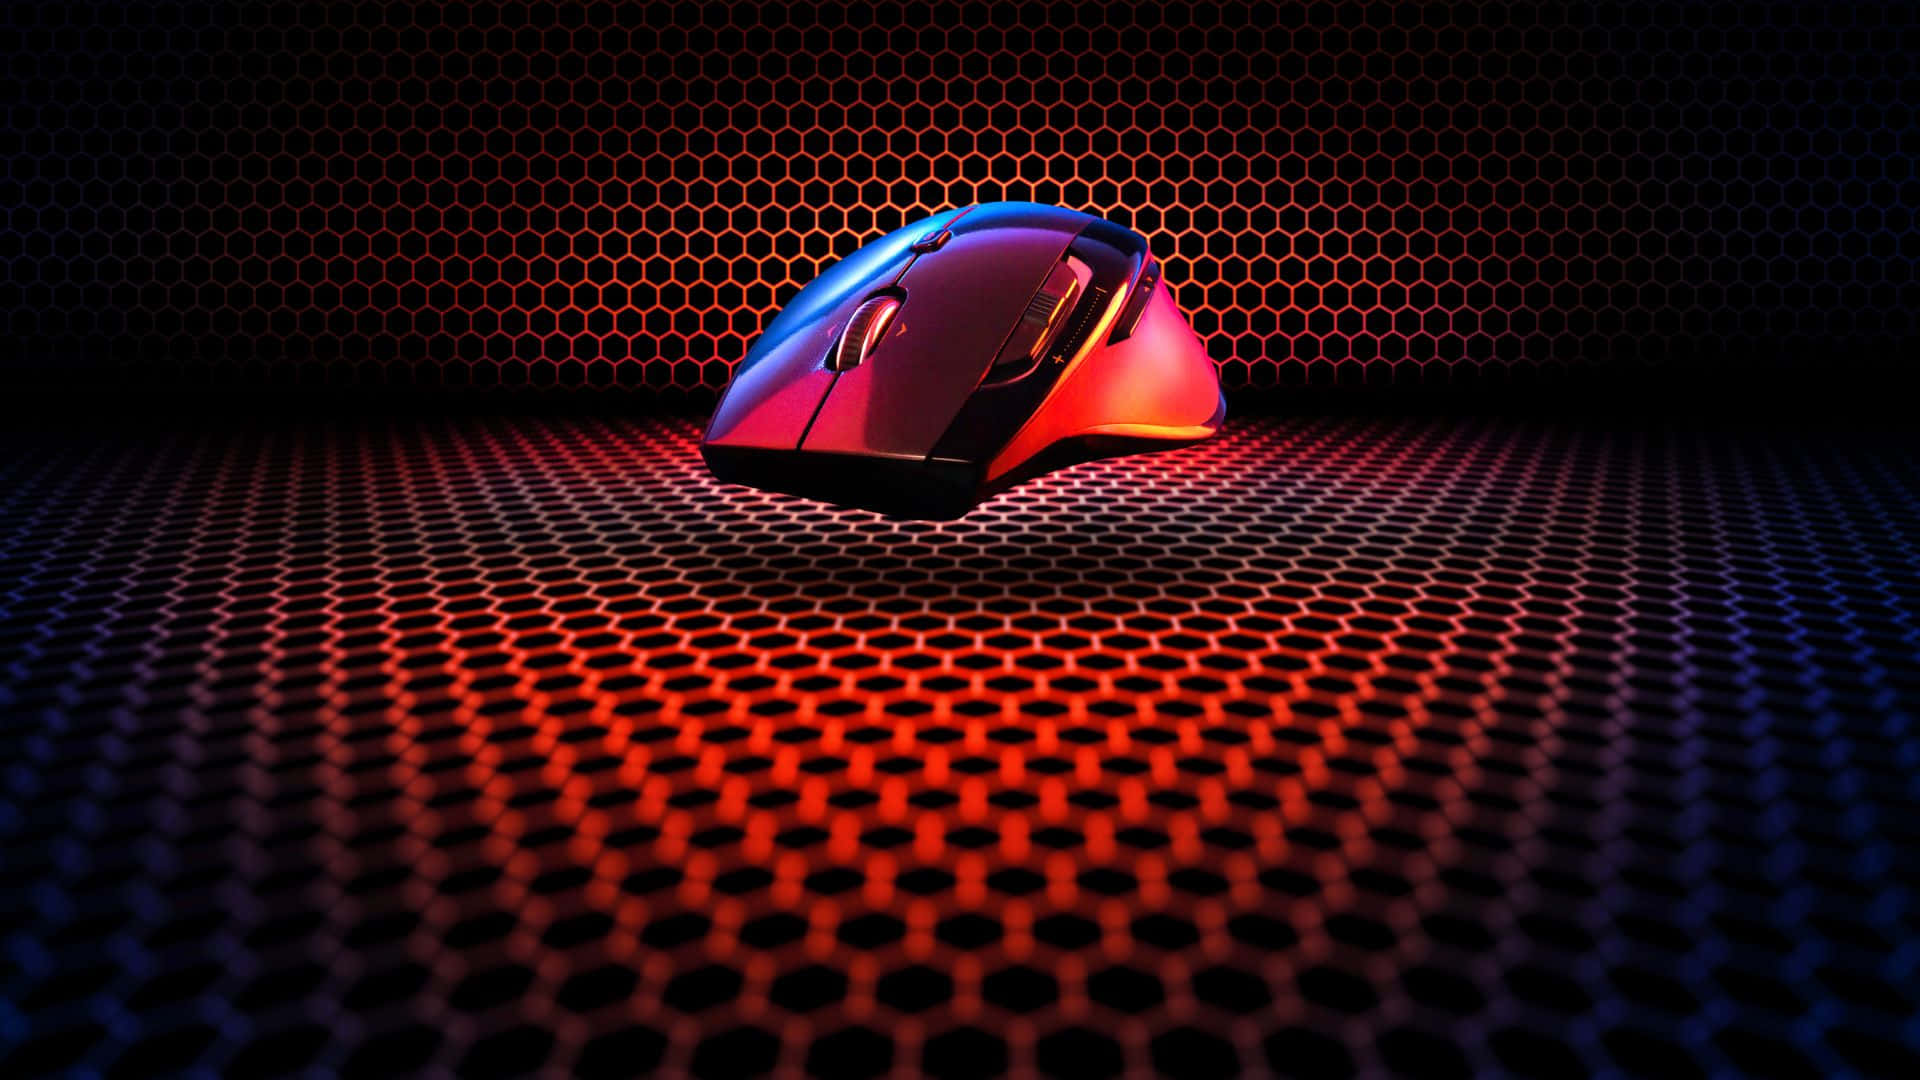 Level up your gaming experience with stylish gaming mice. Wallpaper